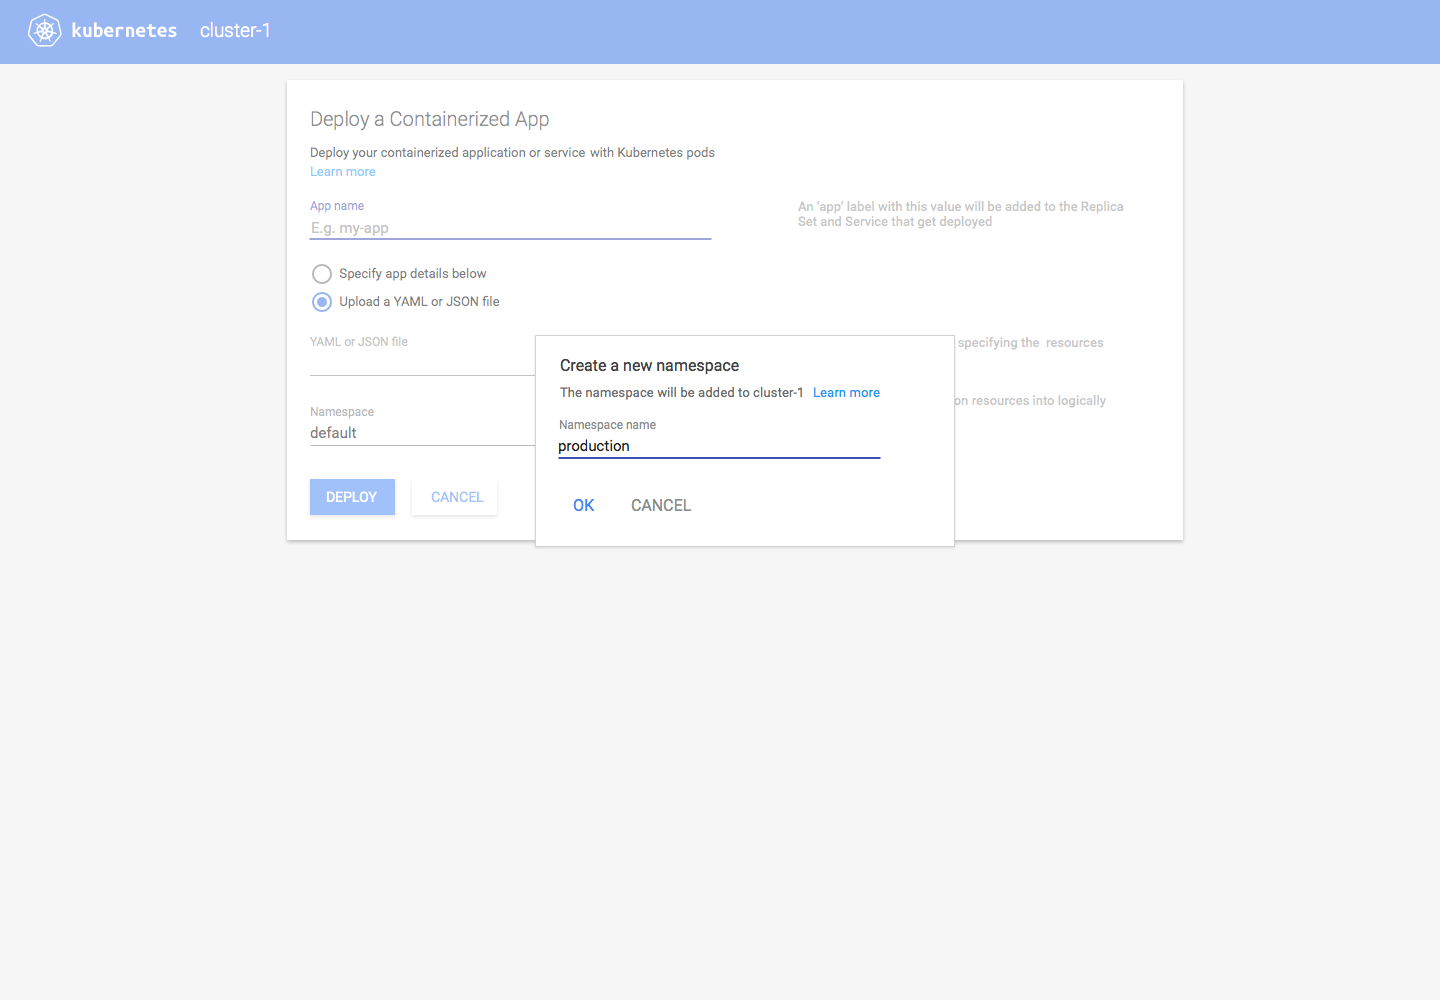 designs/11-11-2015/06_deploy form new namespace specified.png